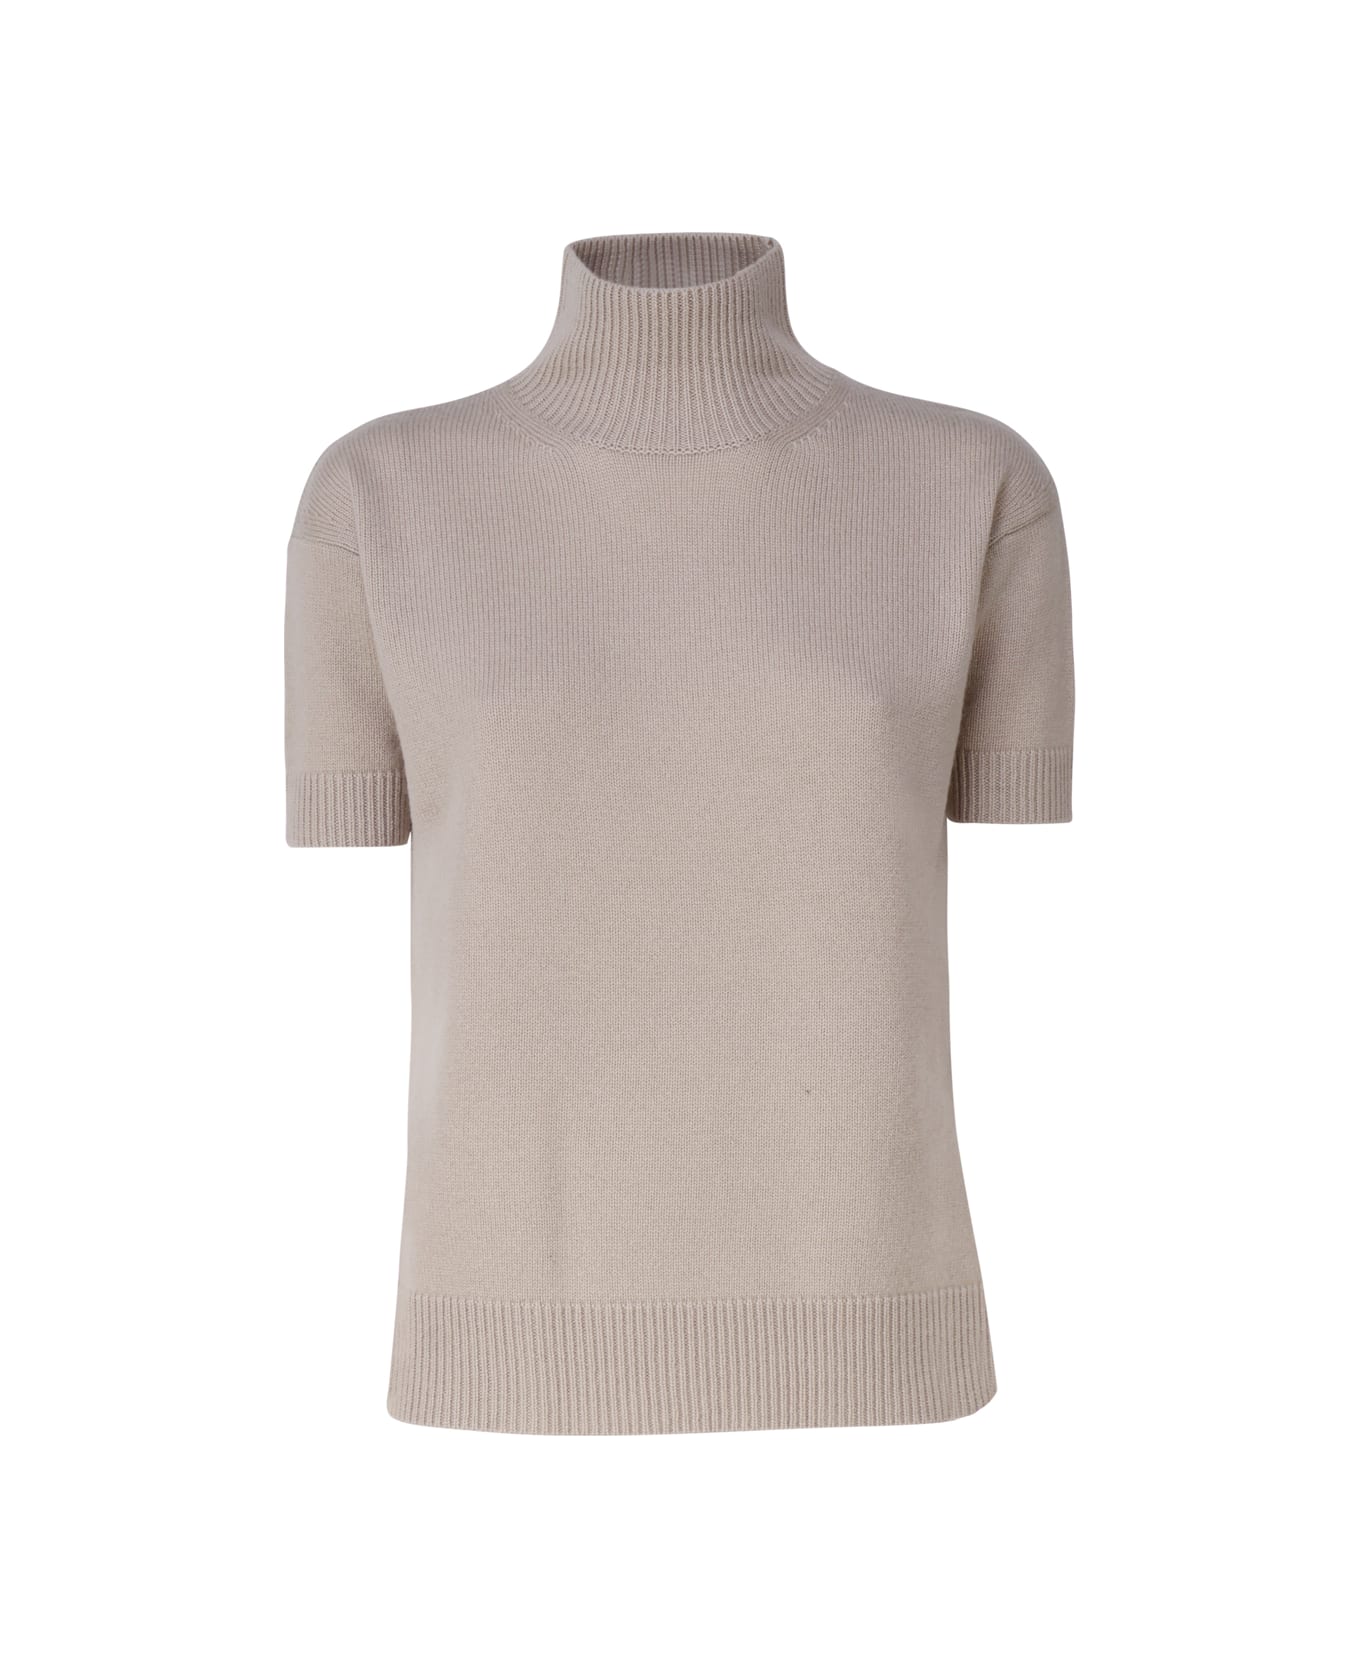 'S Max Mara Wool And Cashmere Turtleneck - Natural